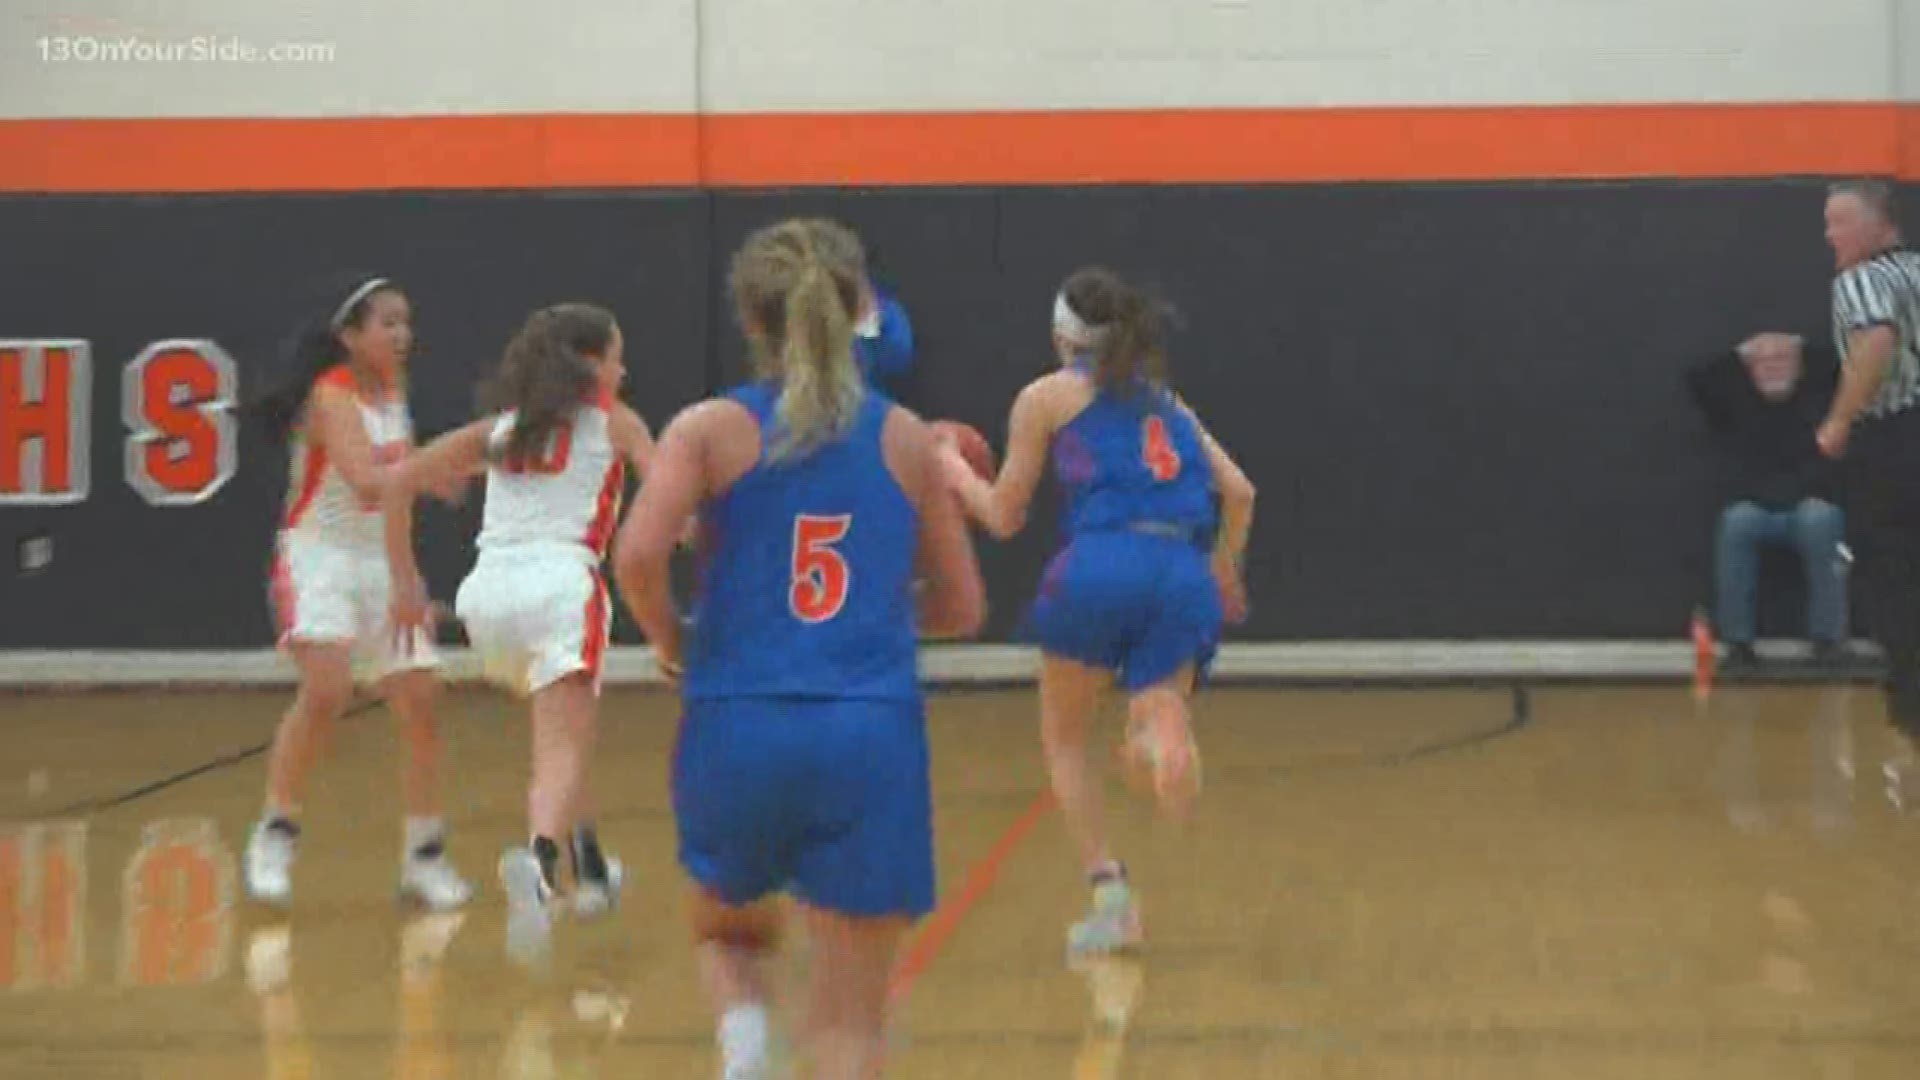 The Saugatuck and Fennville girl's basketball teams faced off Friday, and Saugatuck came out on top.